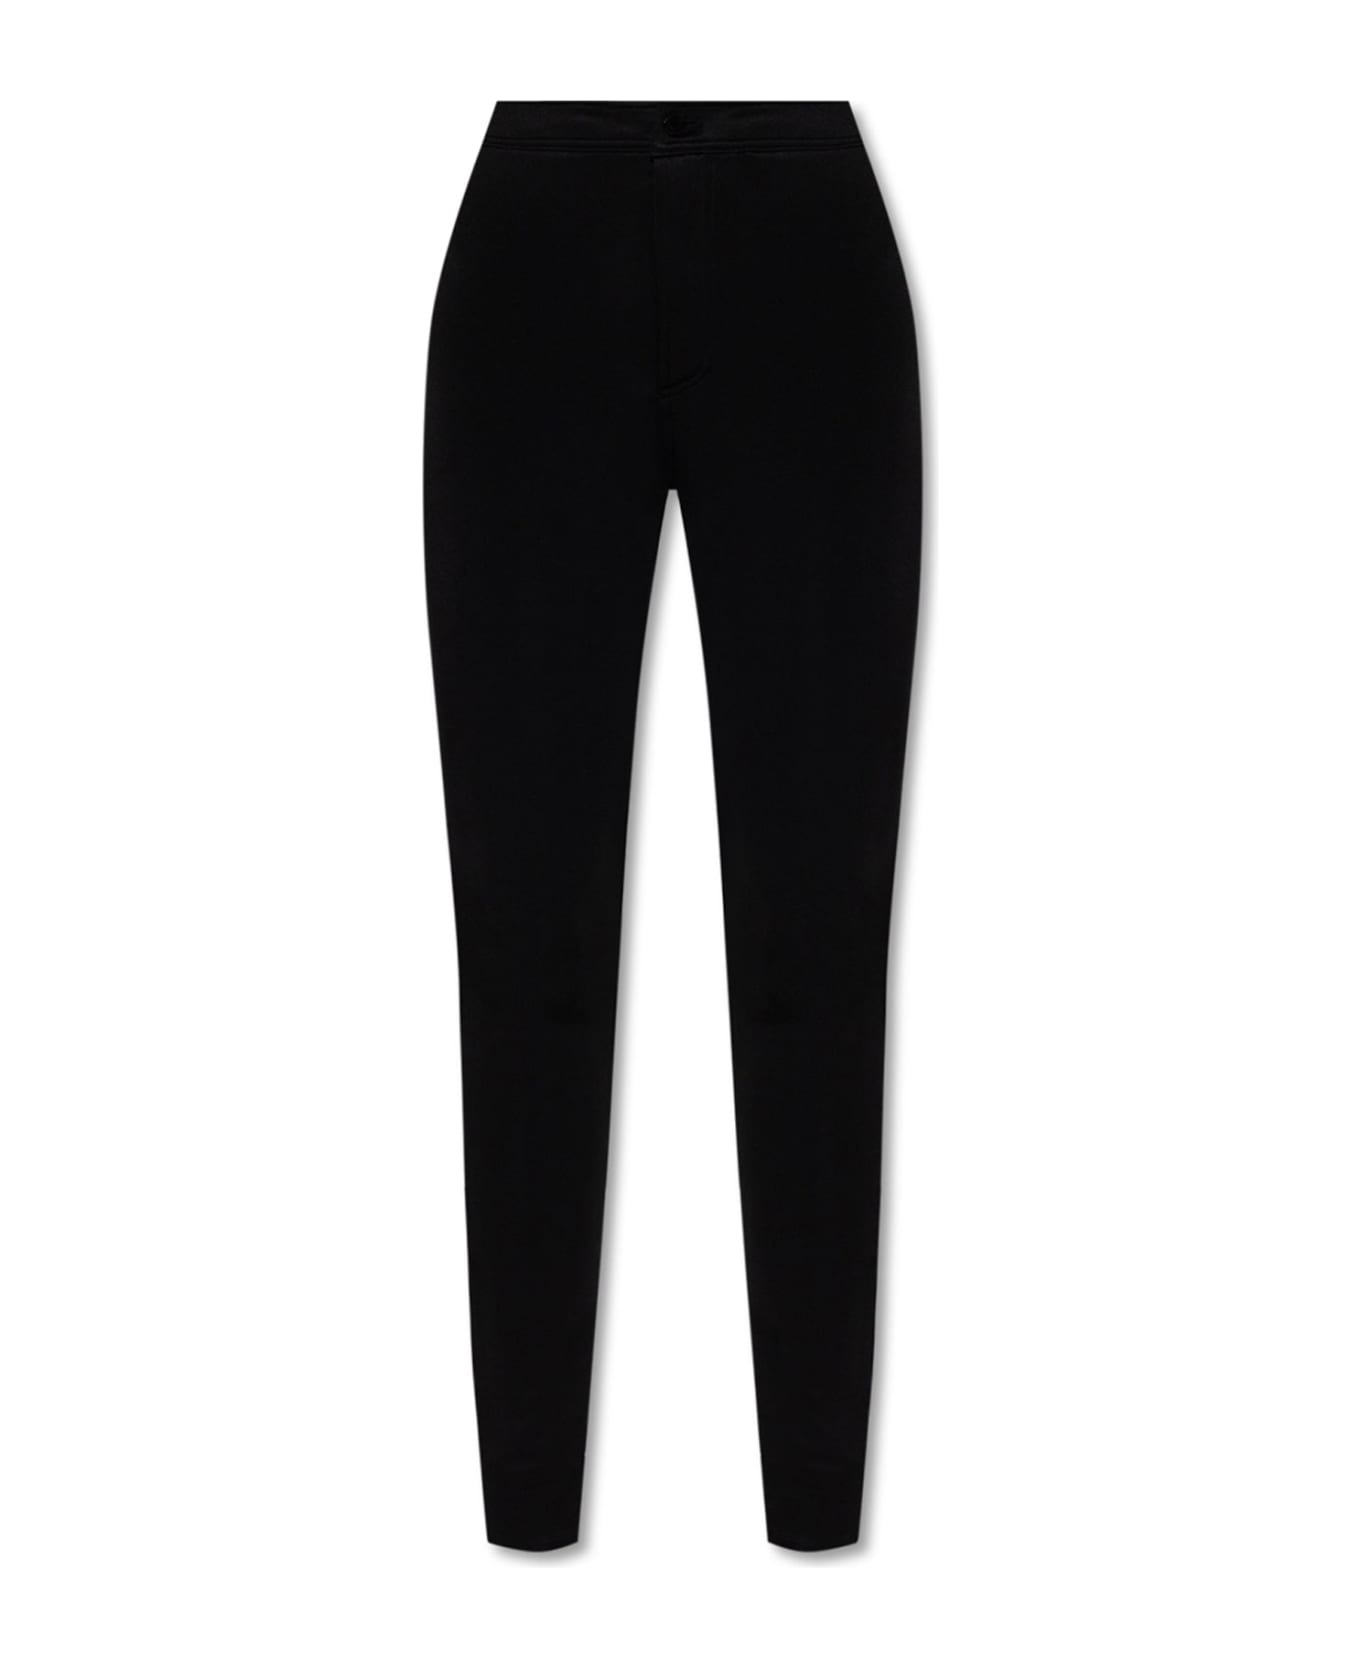 Saint Laurent Drawstring Fitted Trousers - Black ボトムス